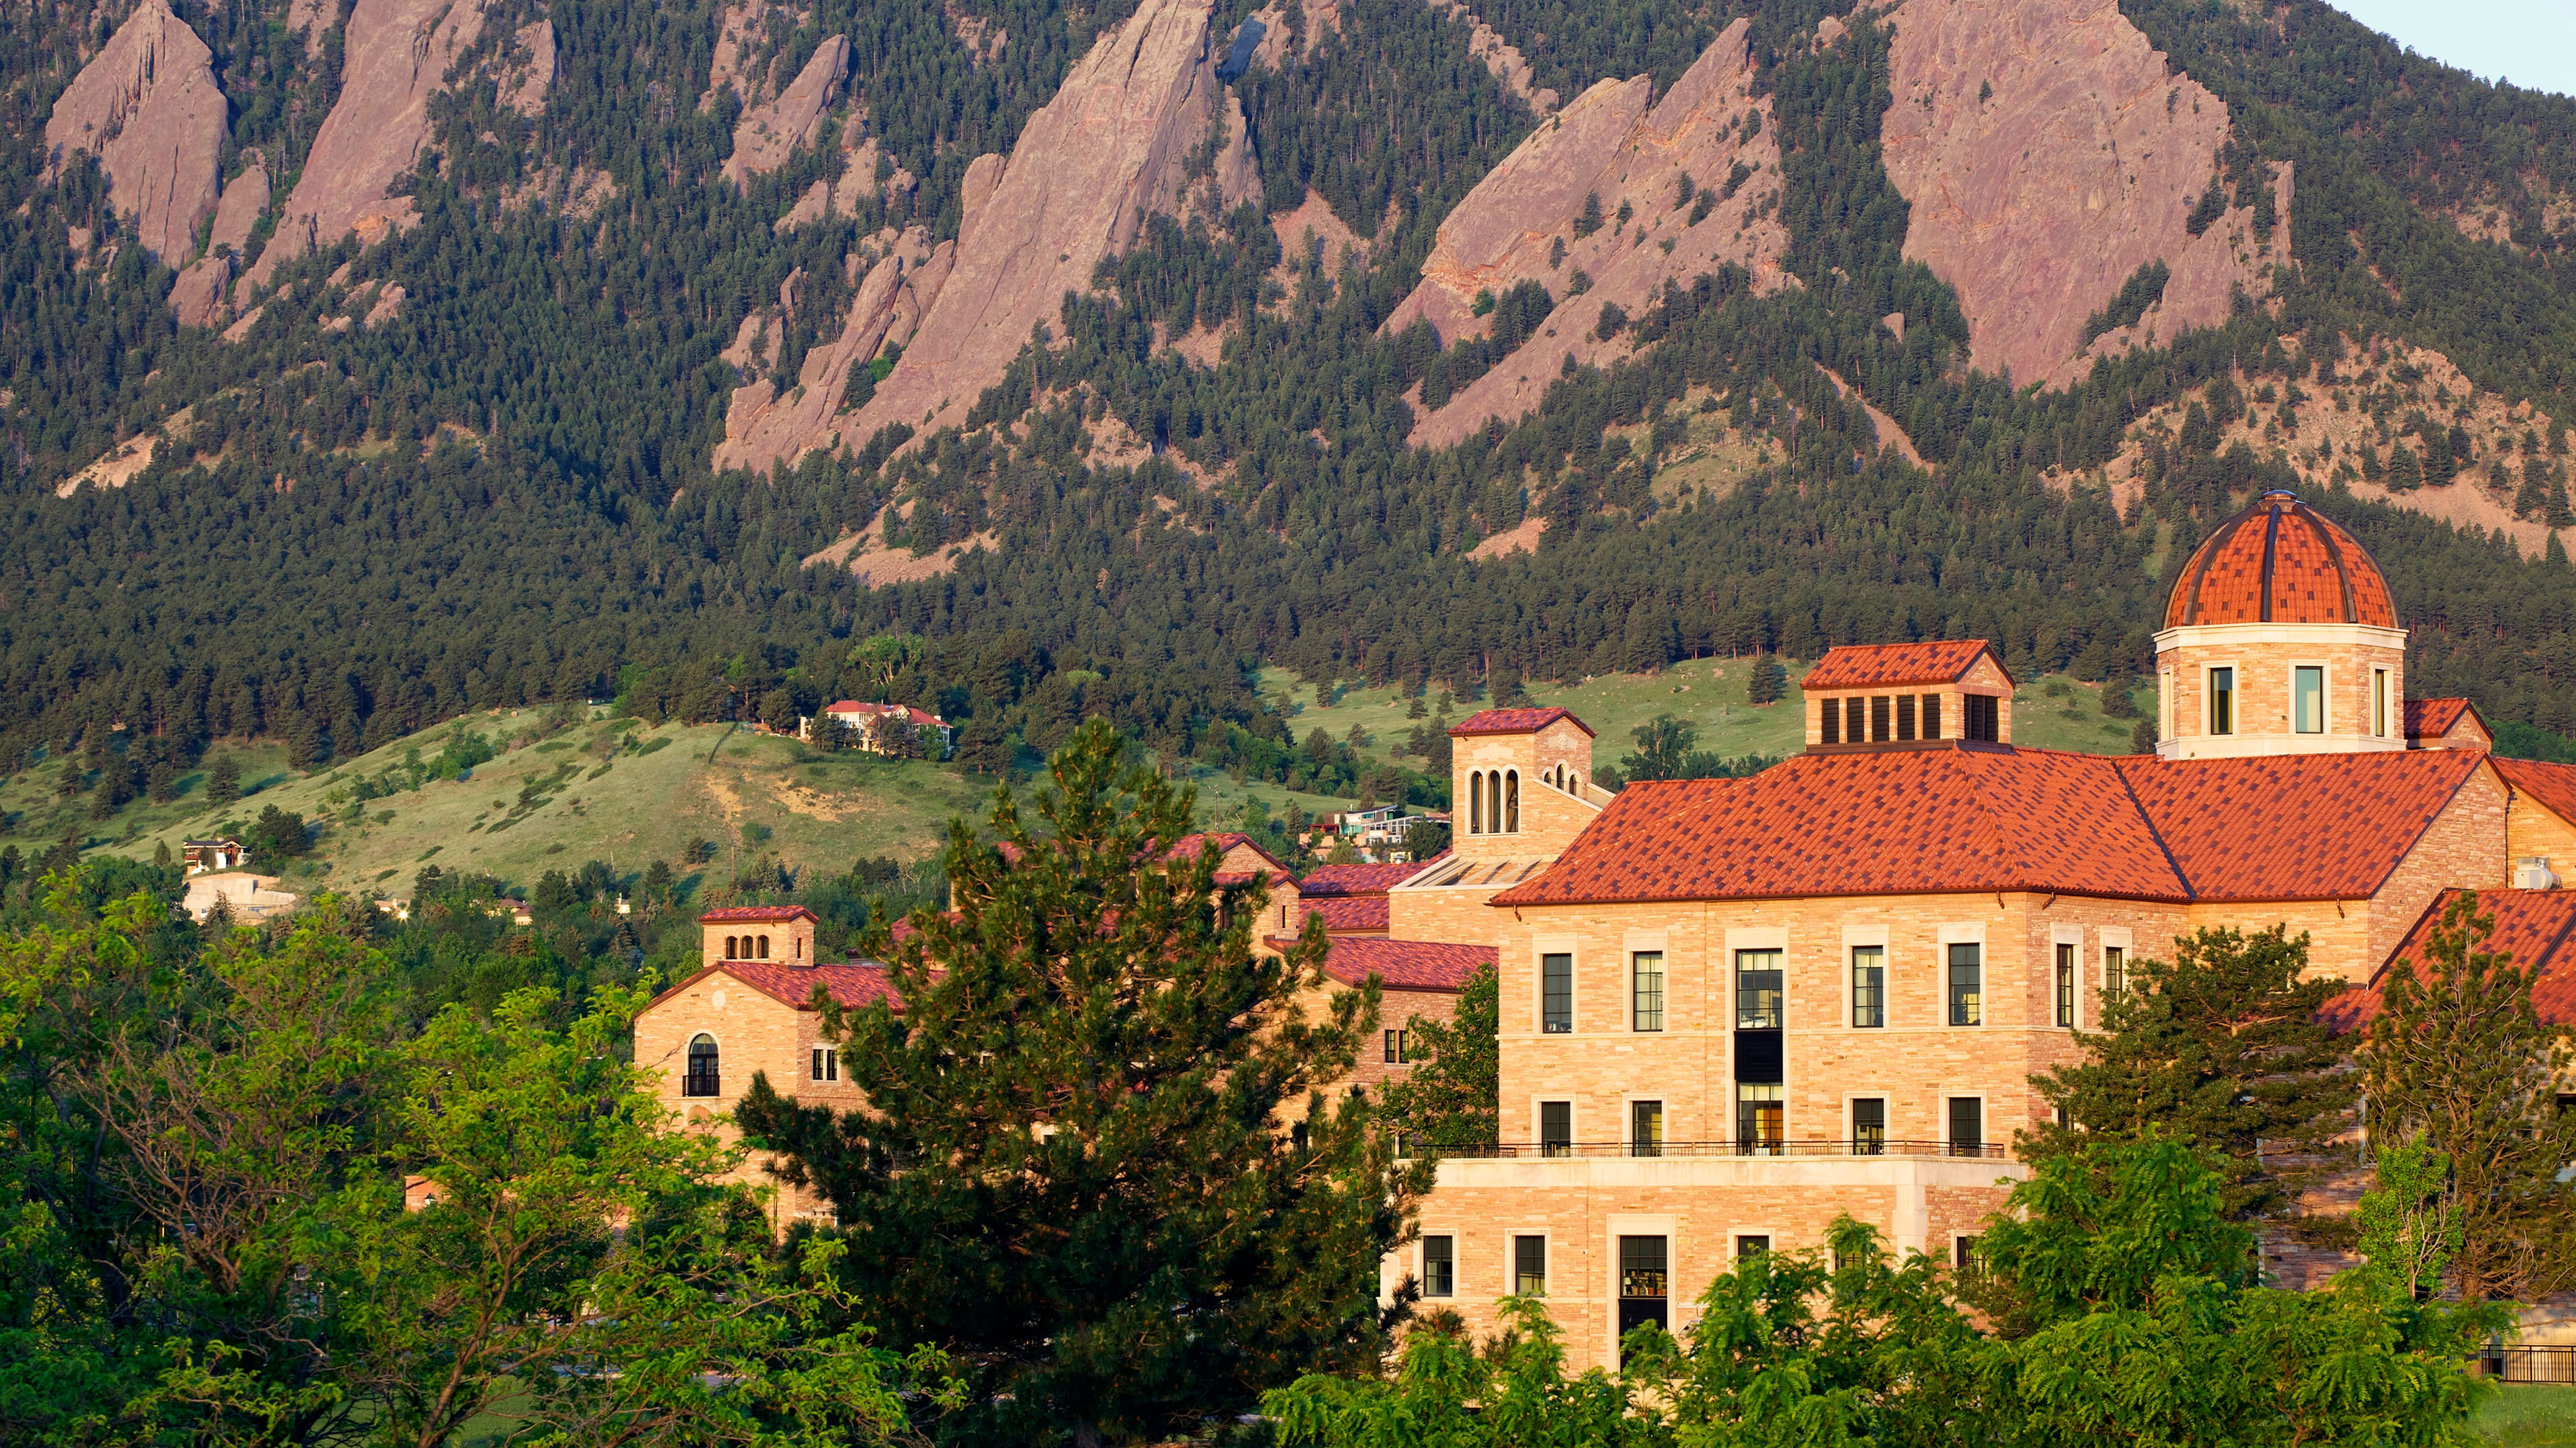 A photo of red brick buildings with mountains in the background